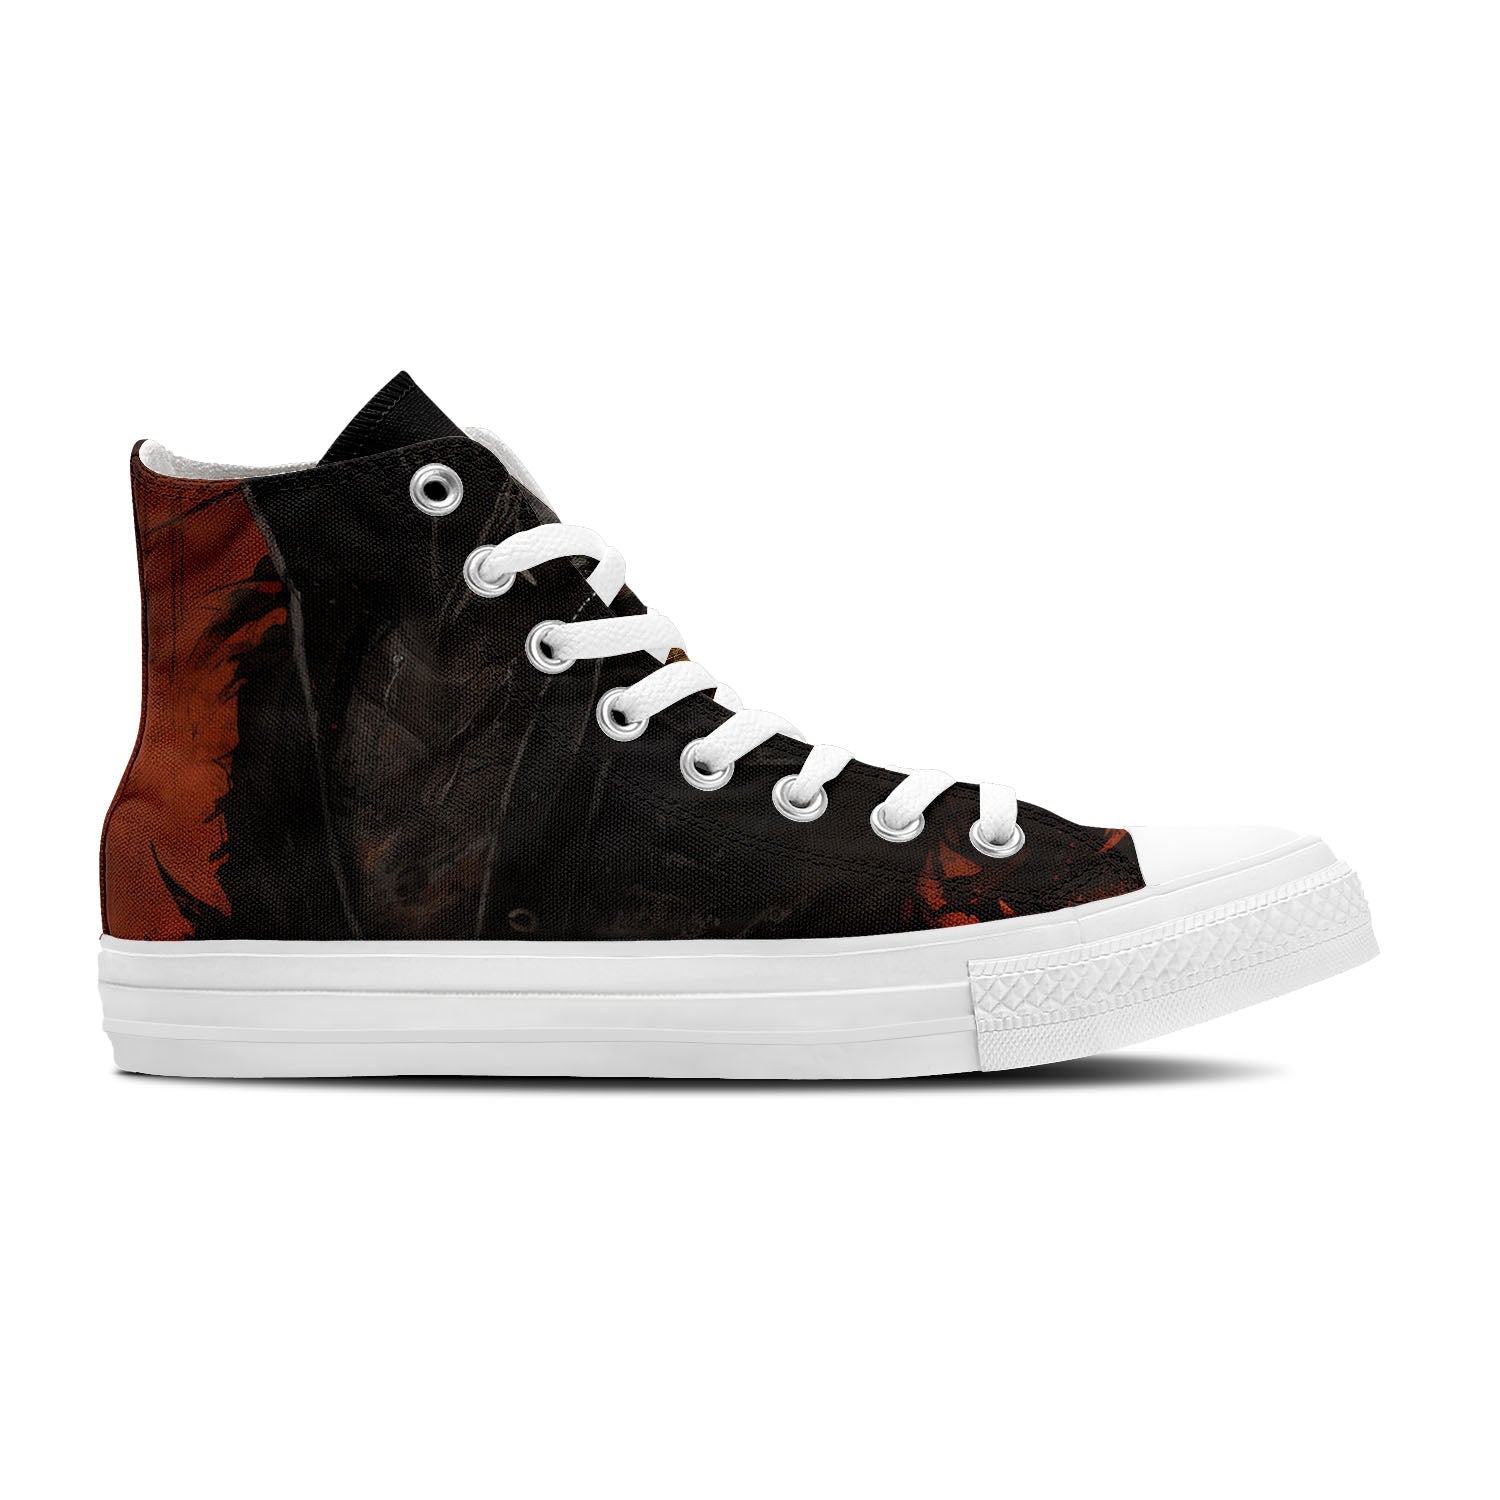 Unleash Your Inner Cool: Trendy Mid-Tops for Men and Women with Cool Cat Designs